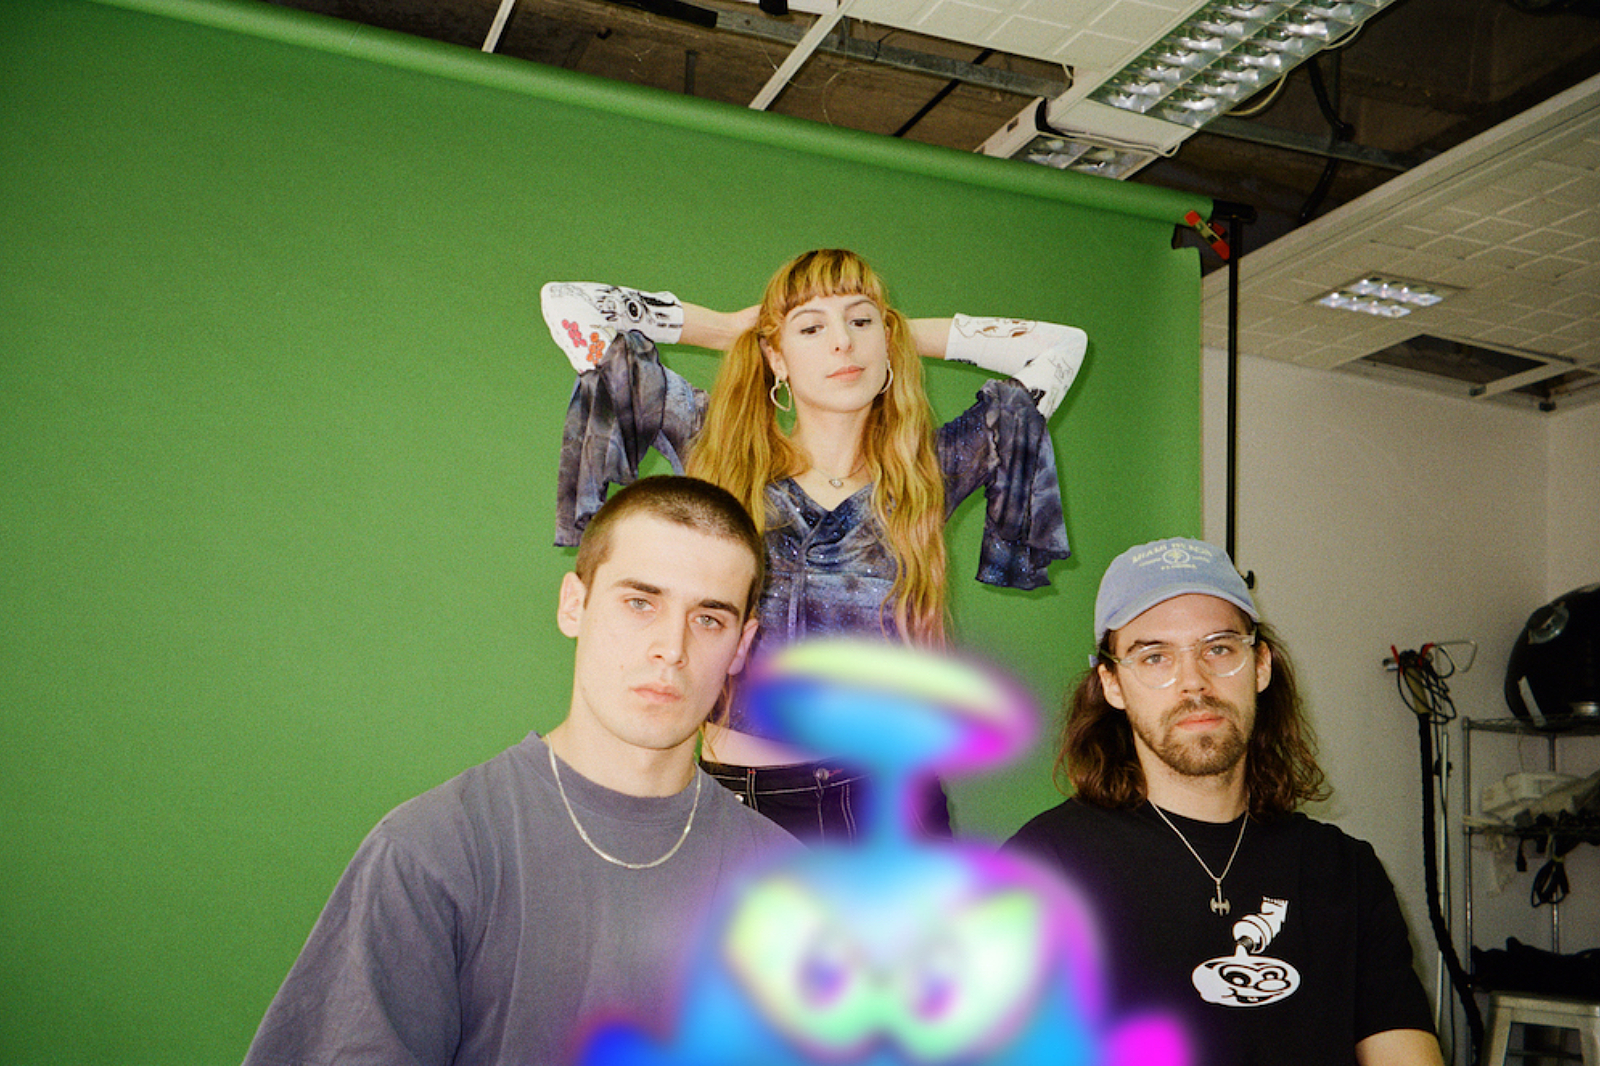 PC Music's Planet 1999 share new song 'Party'